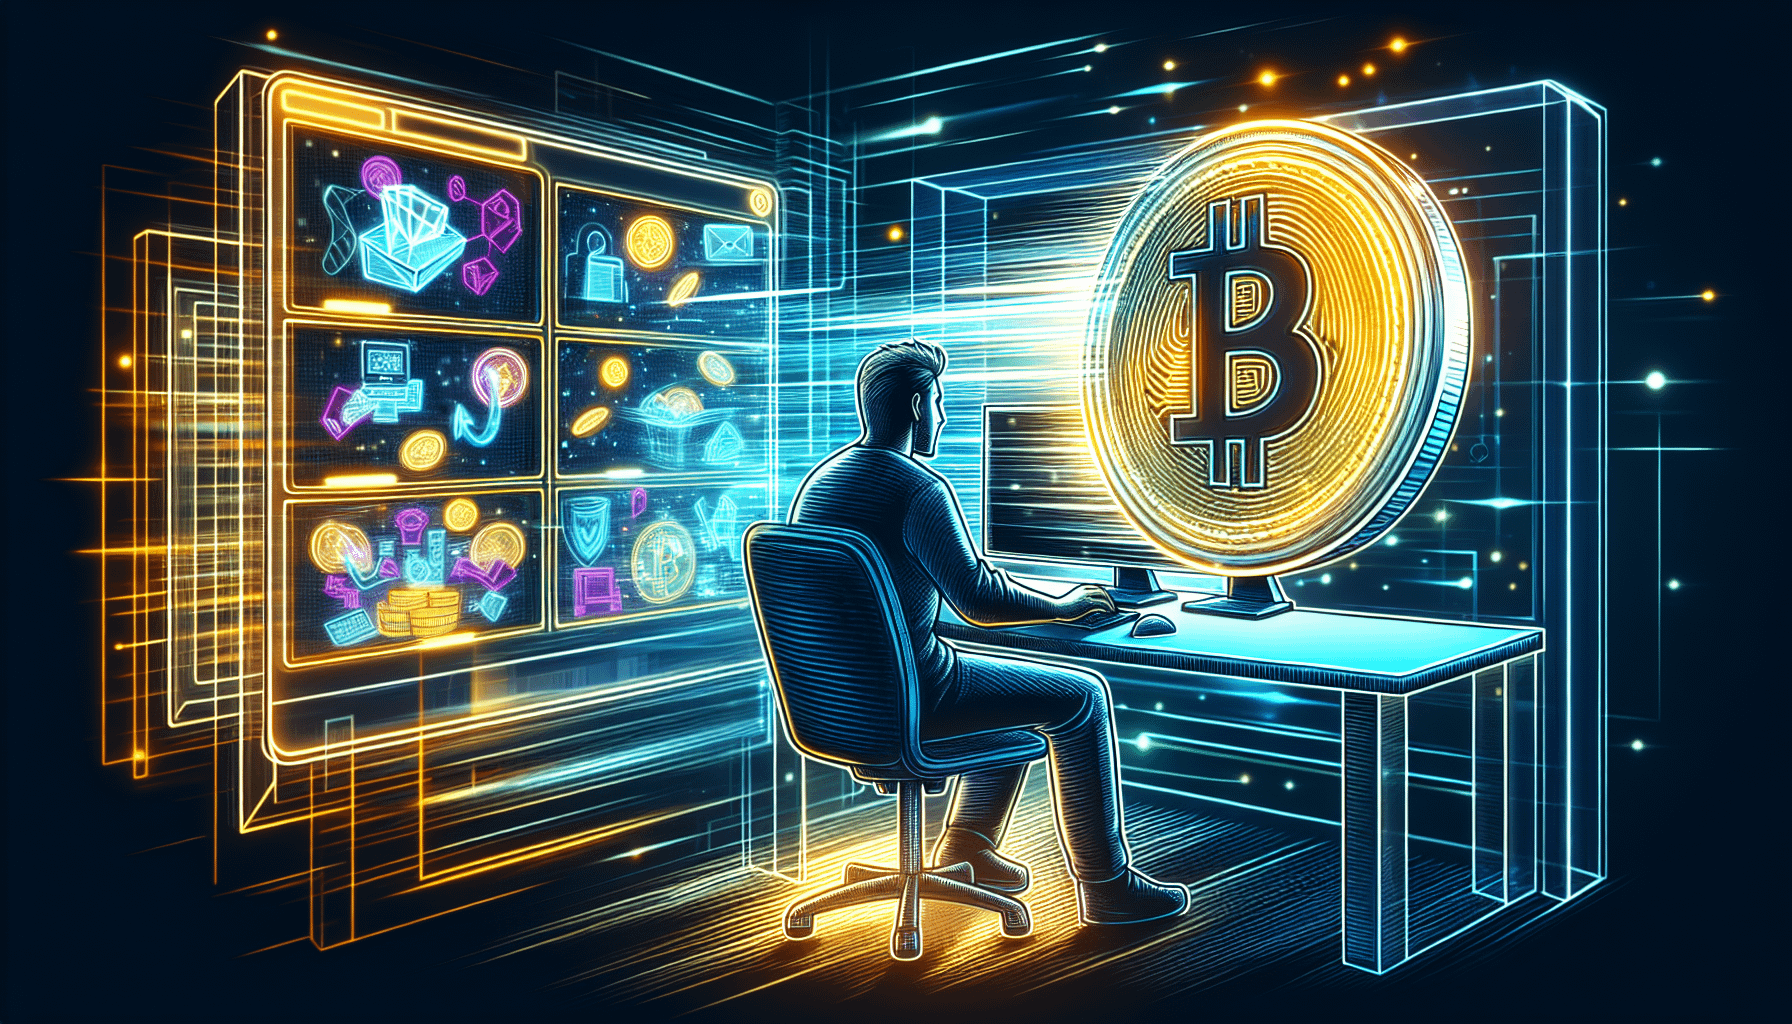 An illustration showing a real-world scenario of a cryptocurrency being used for online transactions